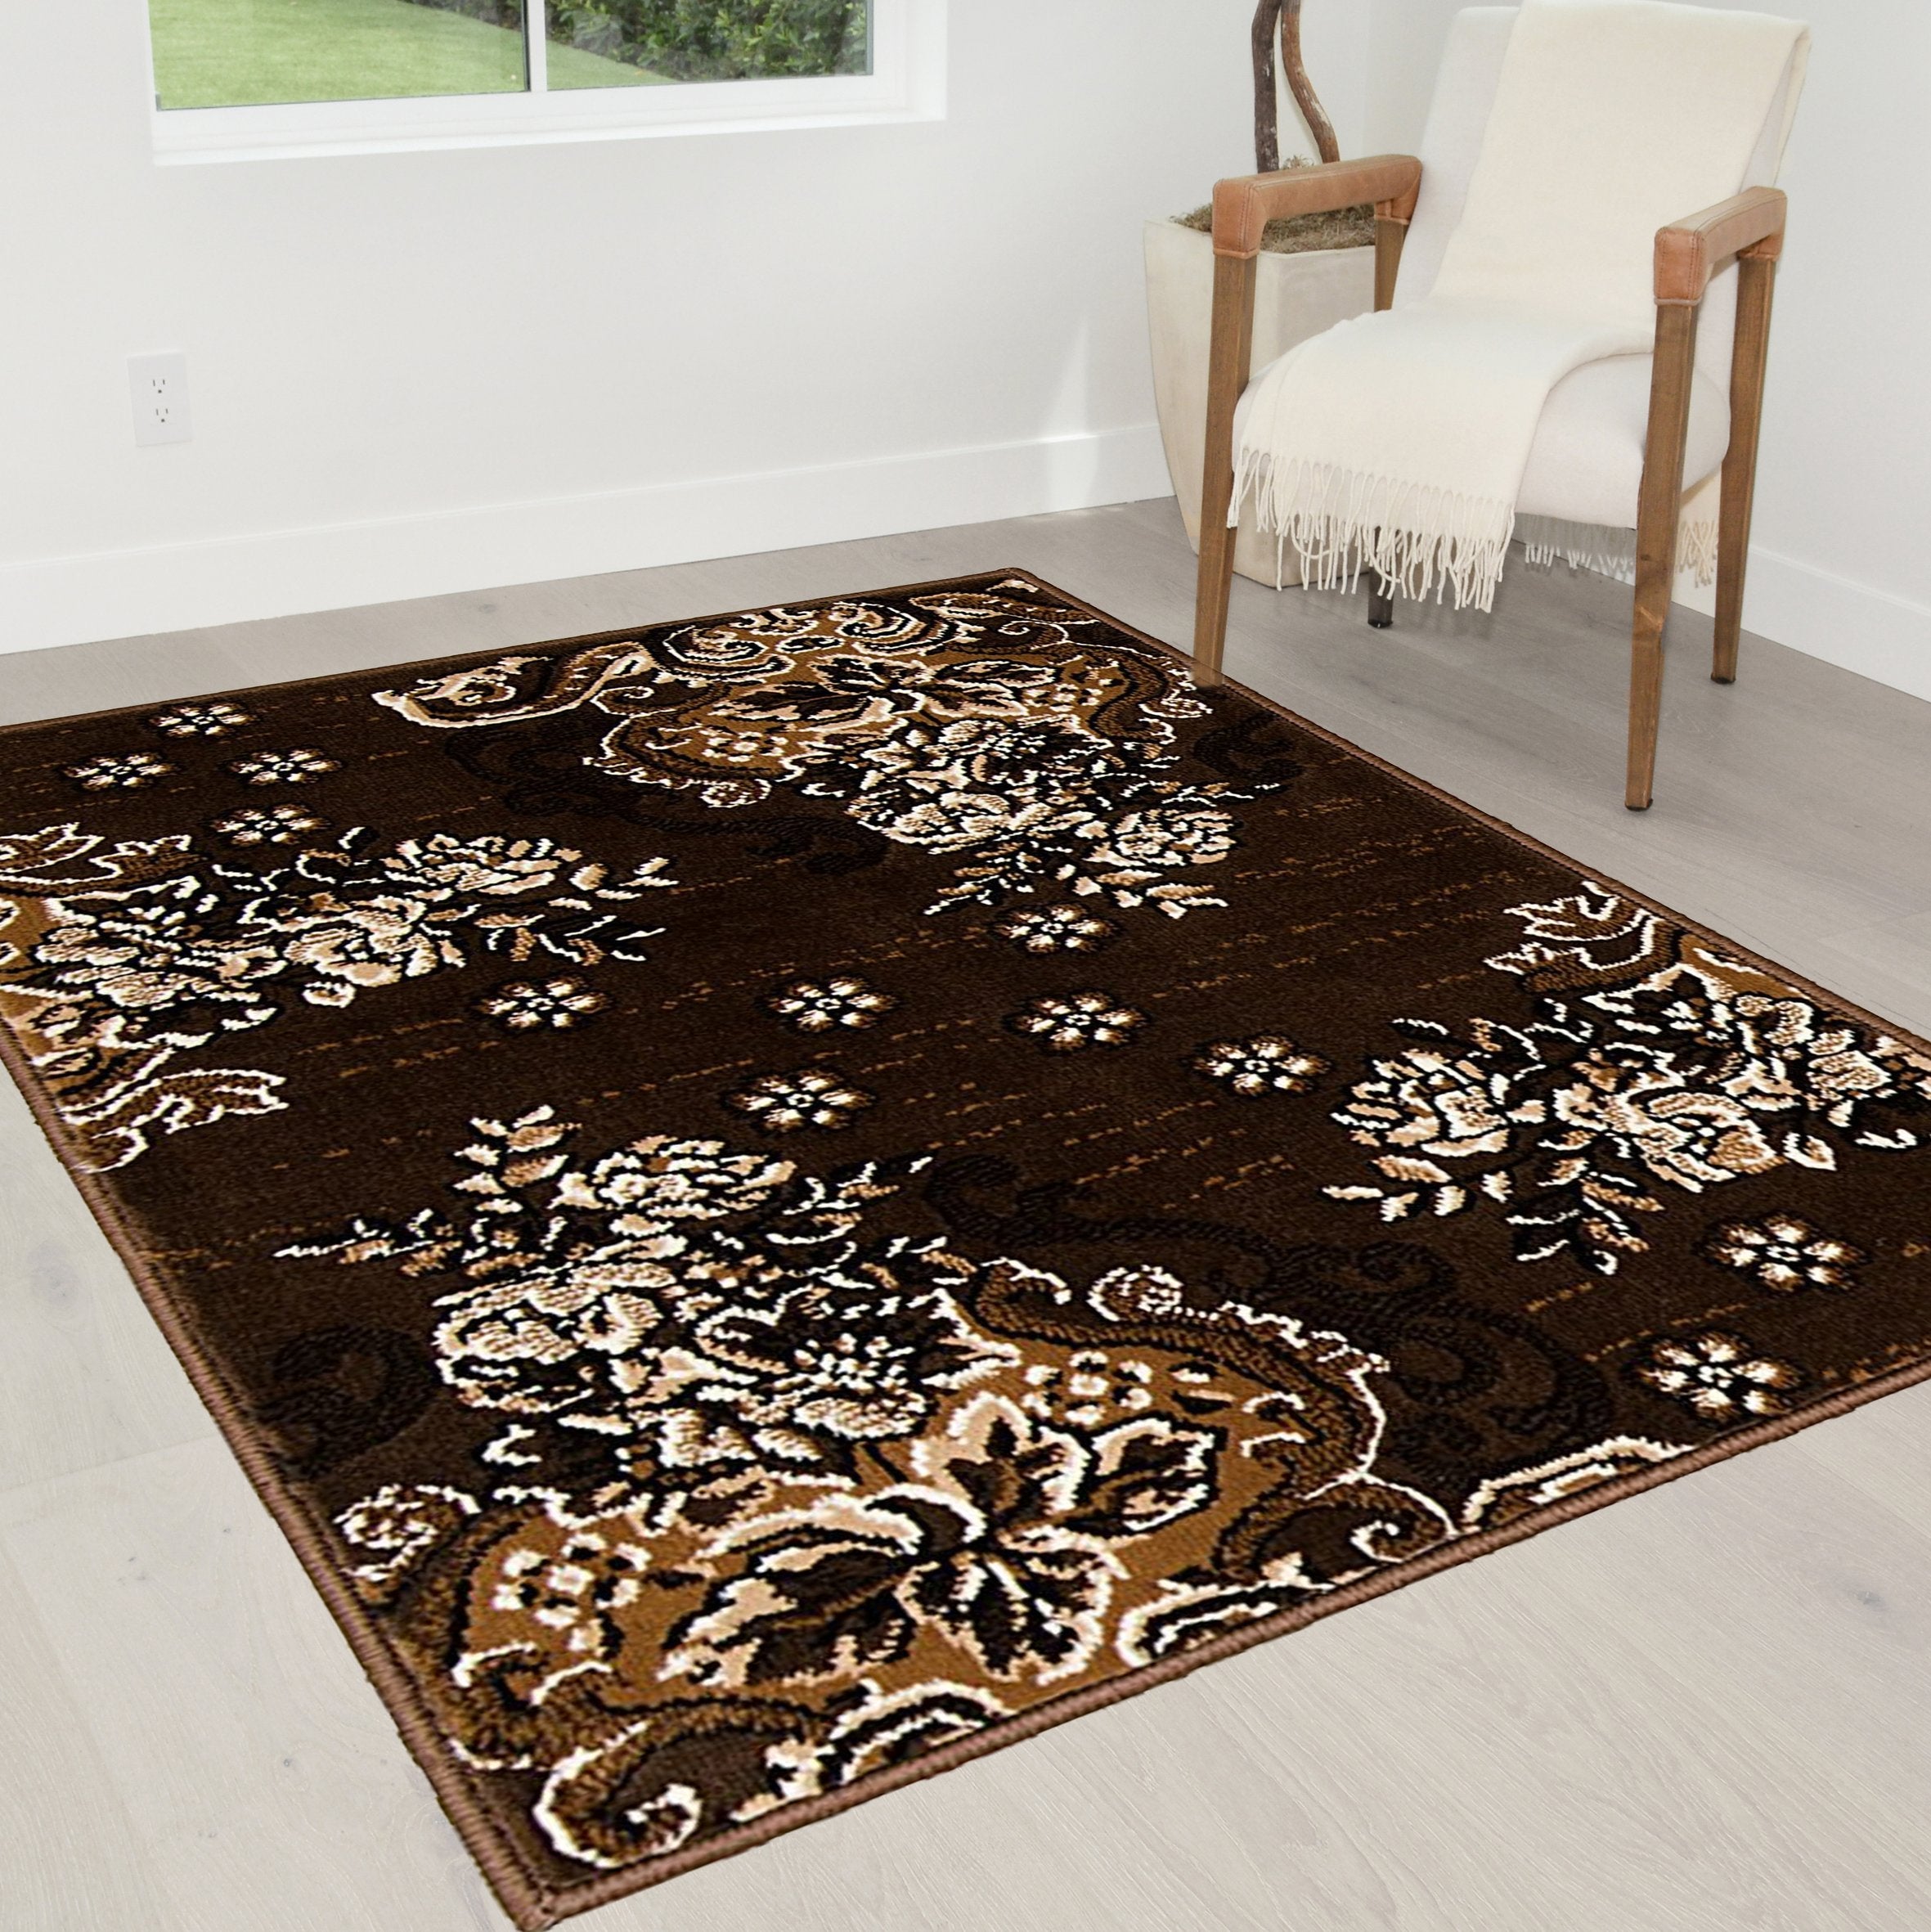 Chocolate Brown/Beige/Mocha/Black/Abstract Area Rug Modern Contemporary Floral and Swirlls Design Pattern